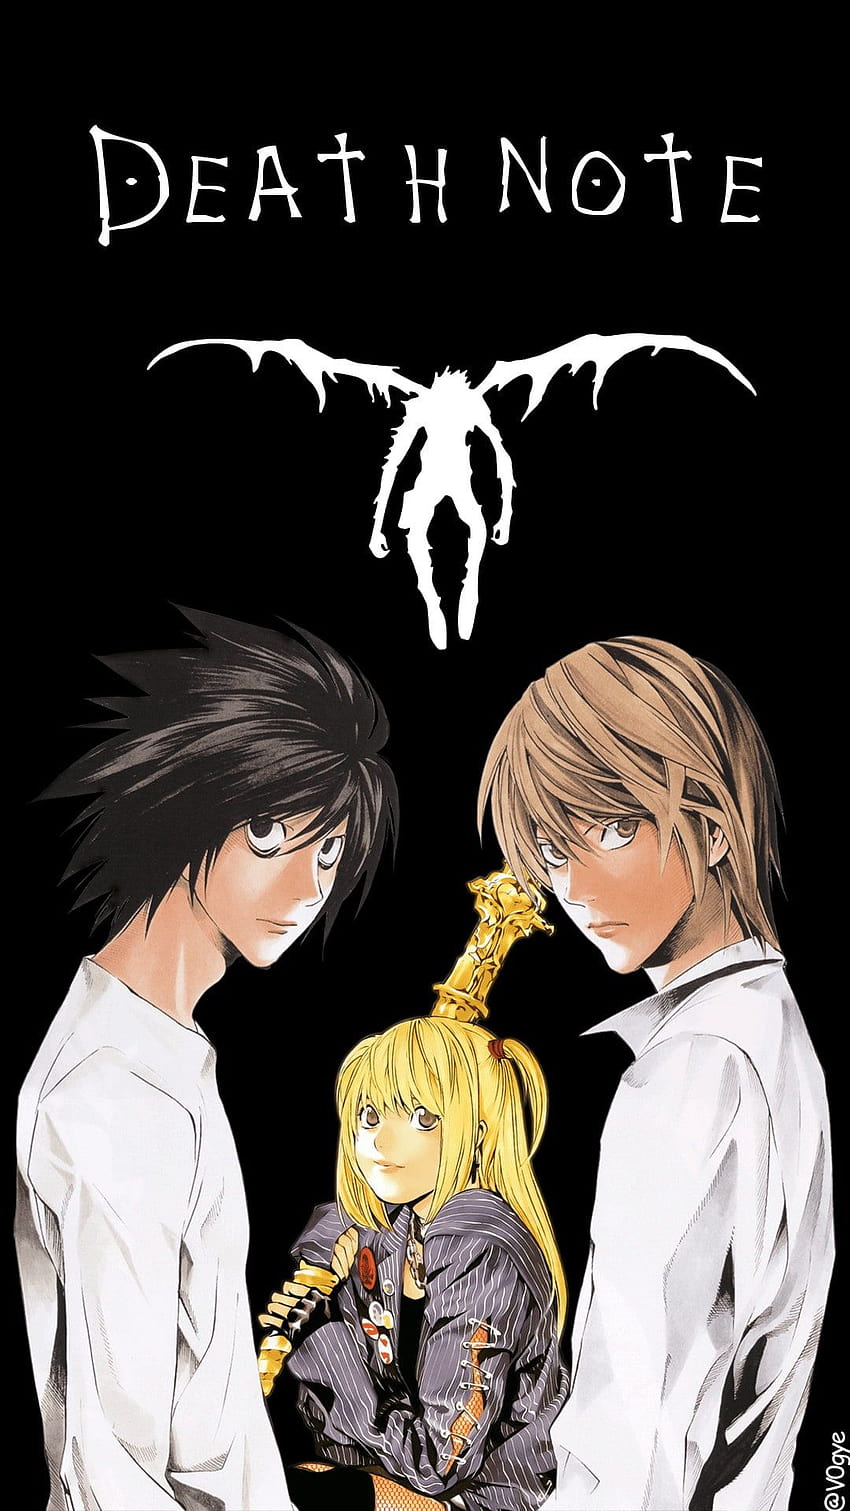 Death note wallpaper for android phone - Google Search - Death Note